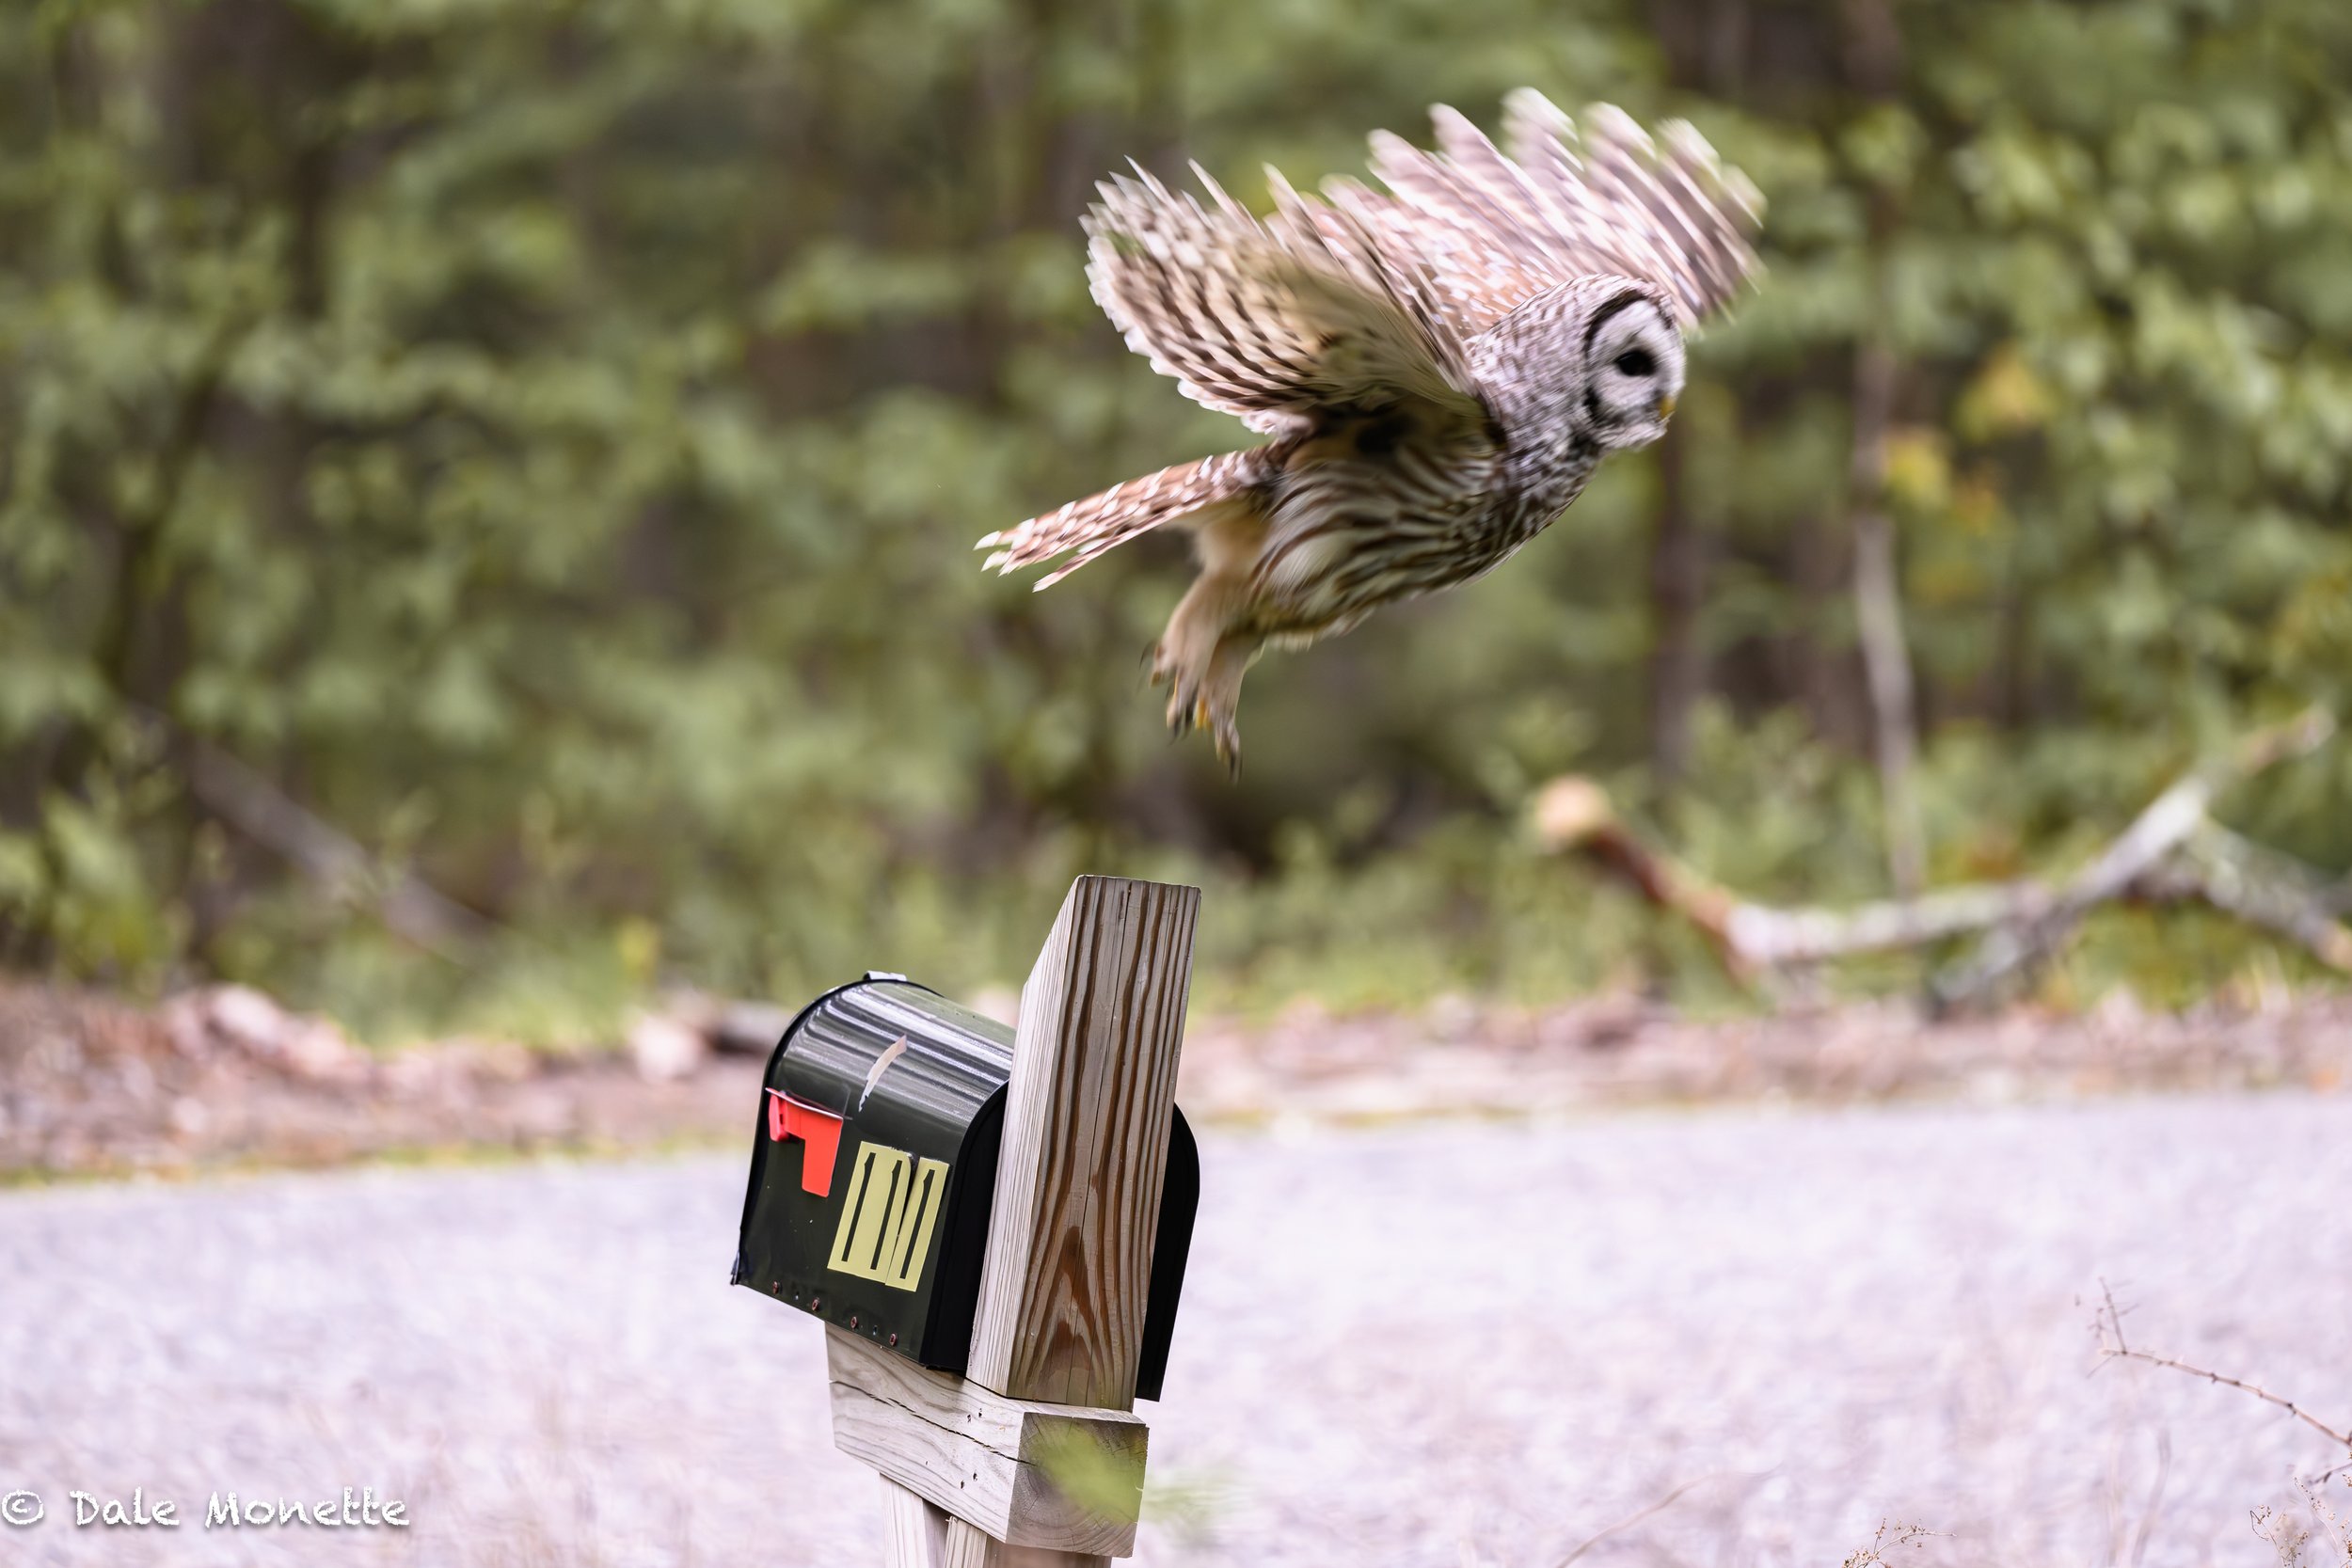   Yay,  we now have airmail !!    